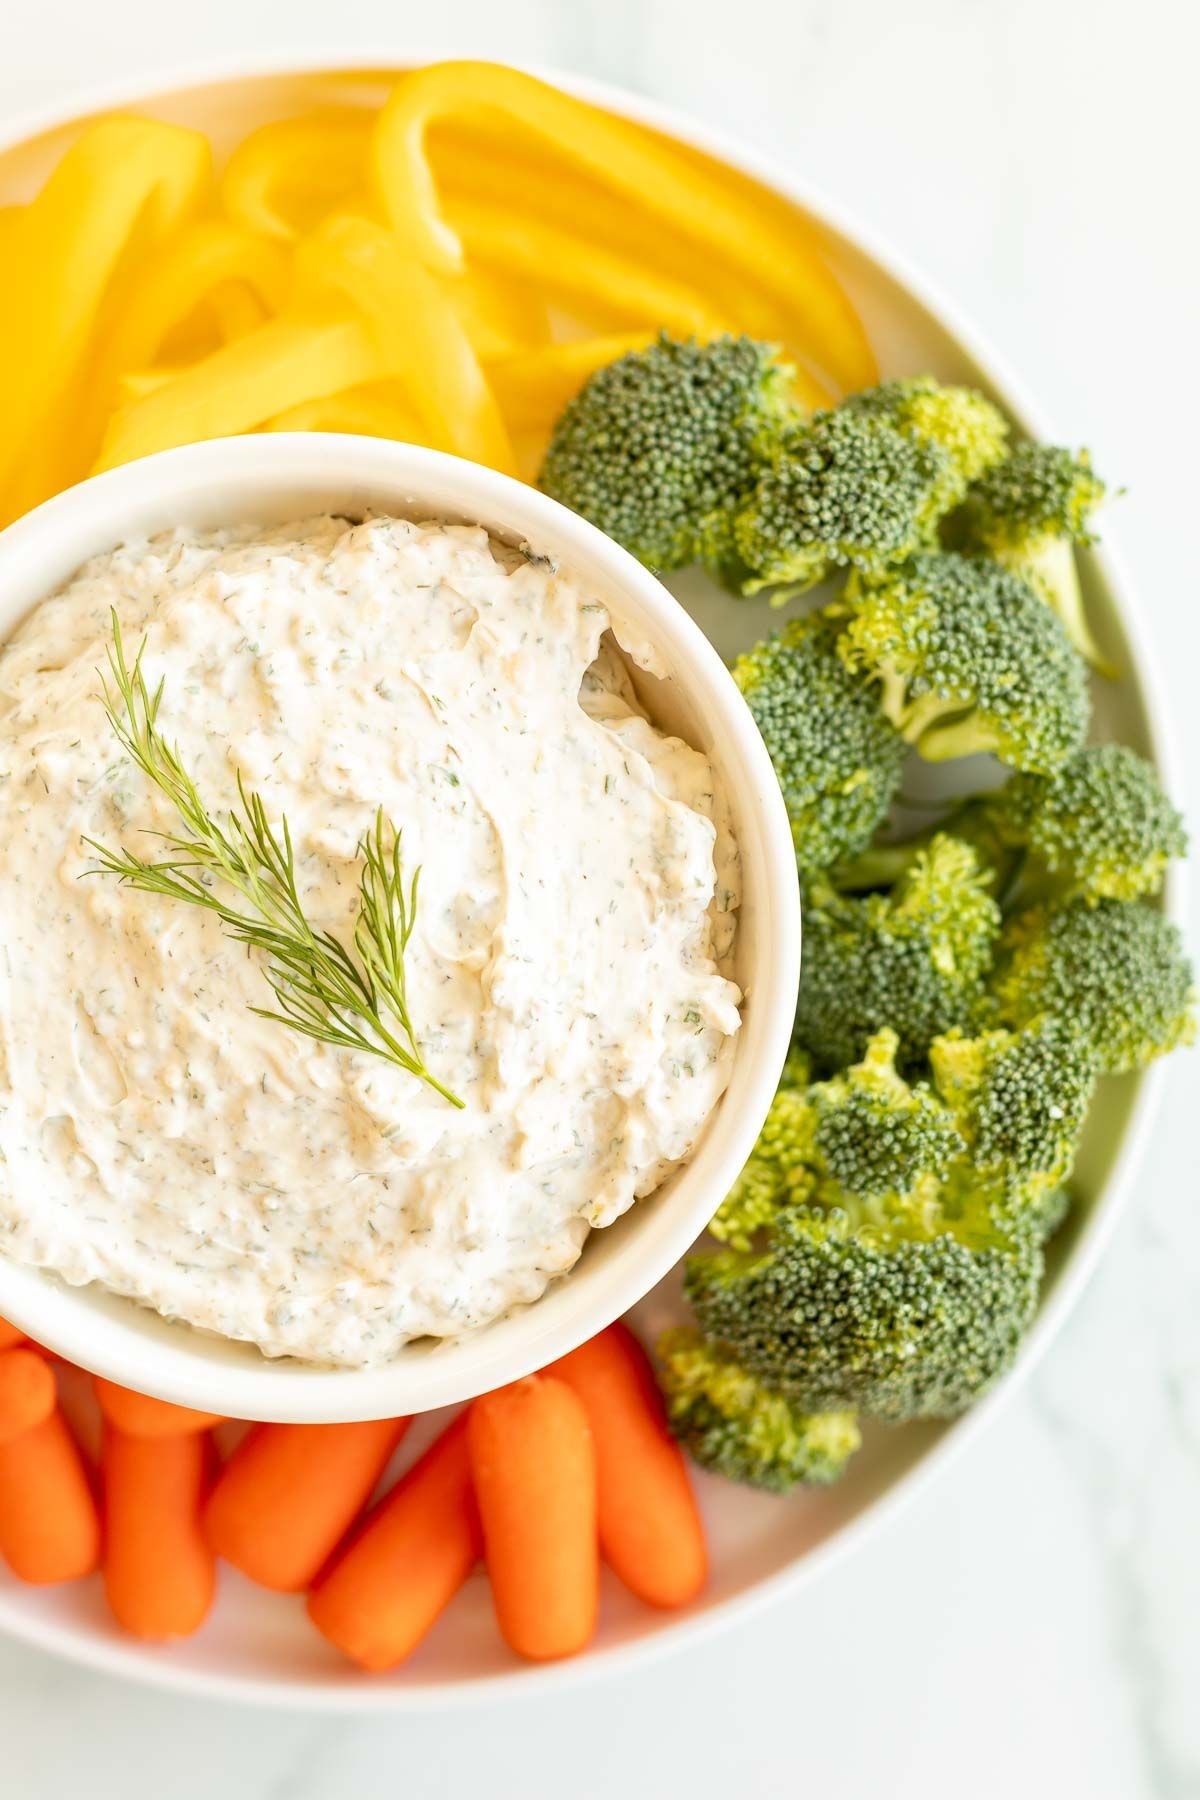 A bowl of veggie dip surrounded by colorful veggies